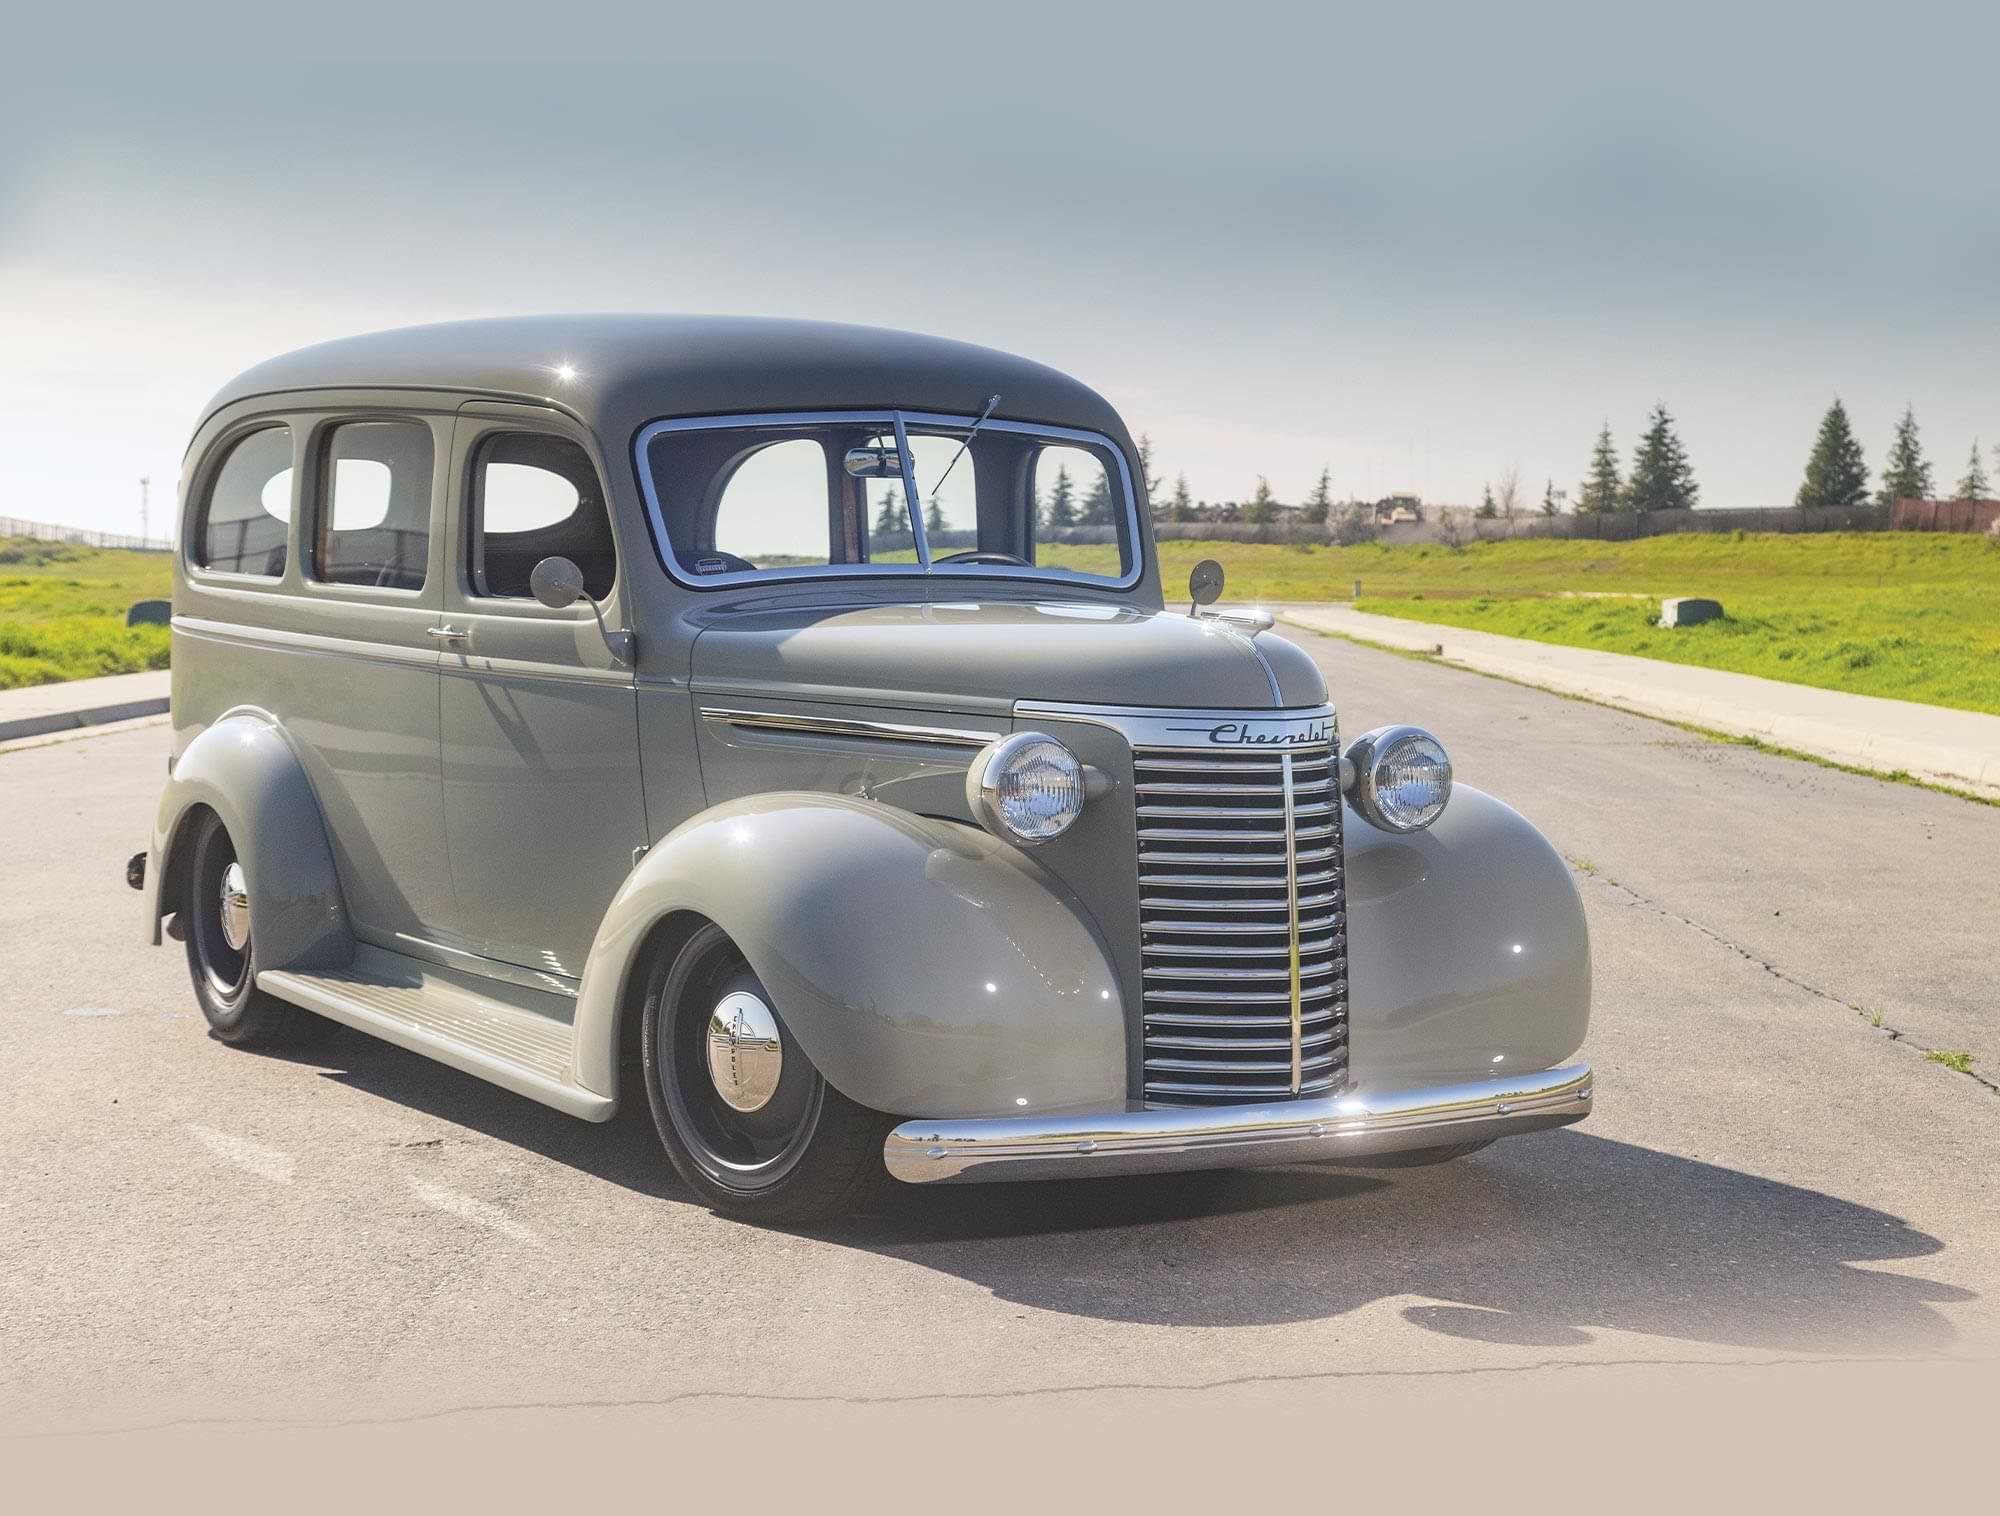 three quarter front view of the ’40 Chevrolet suburban